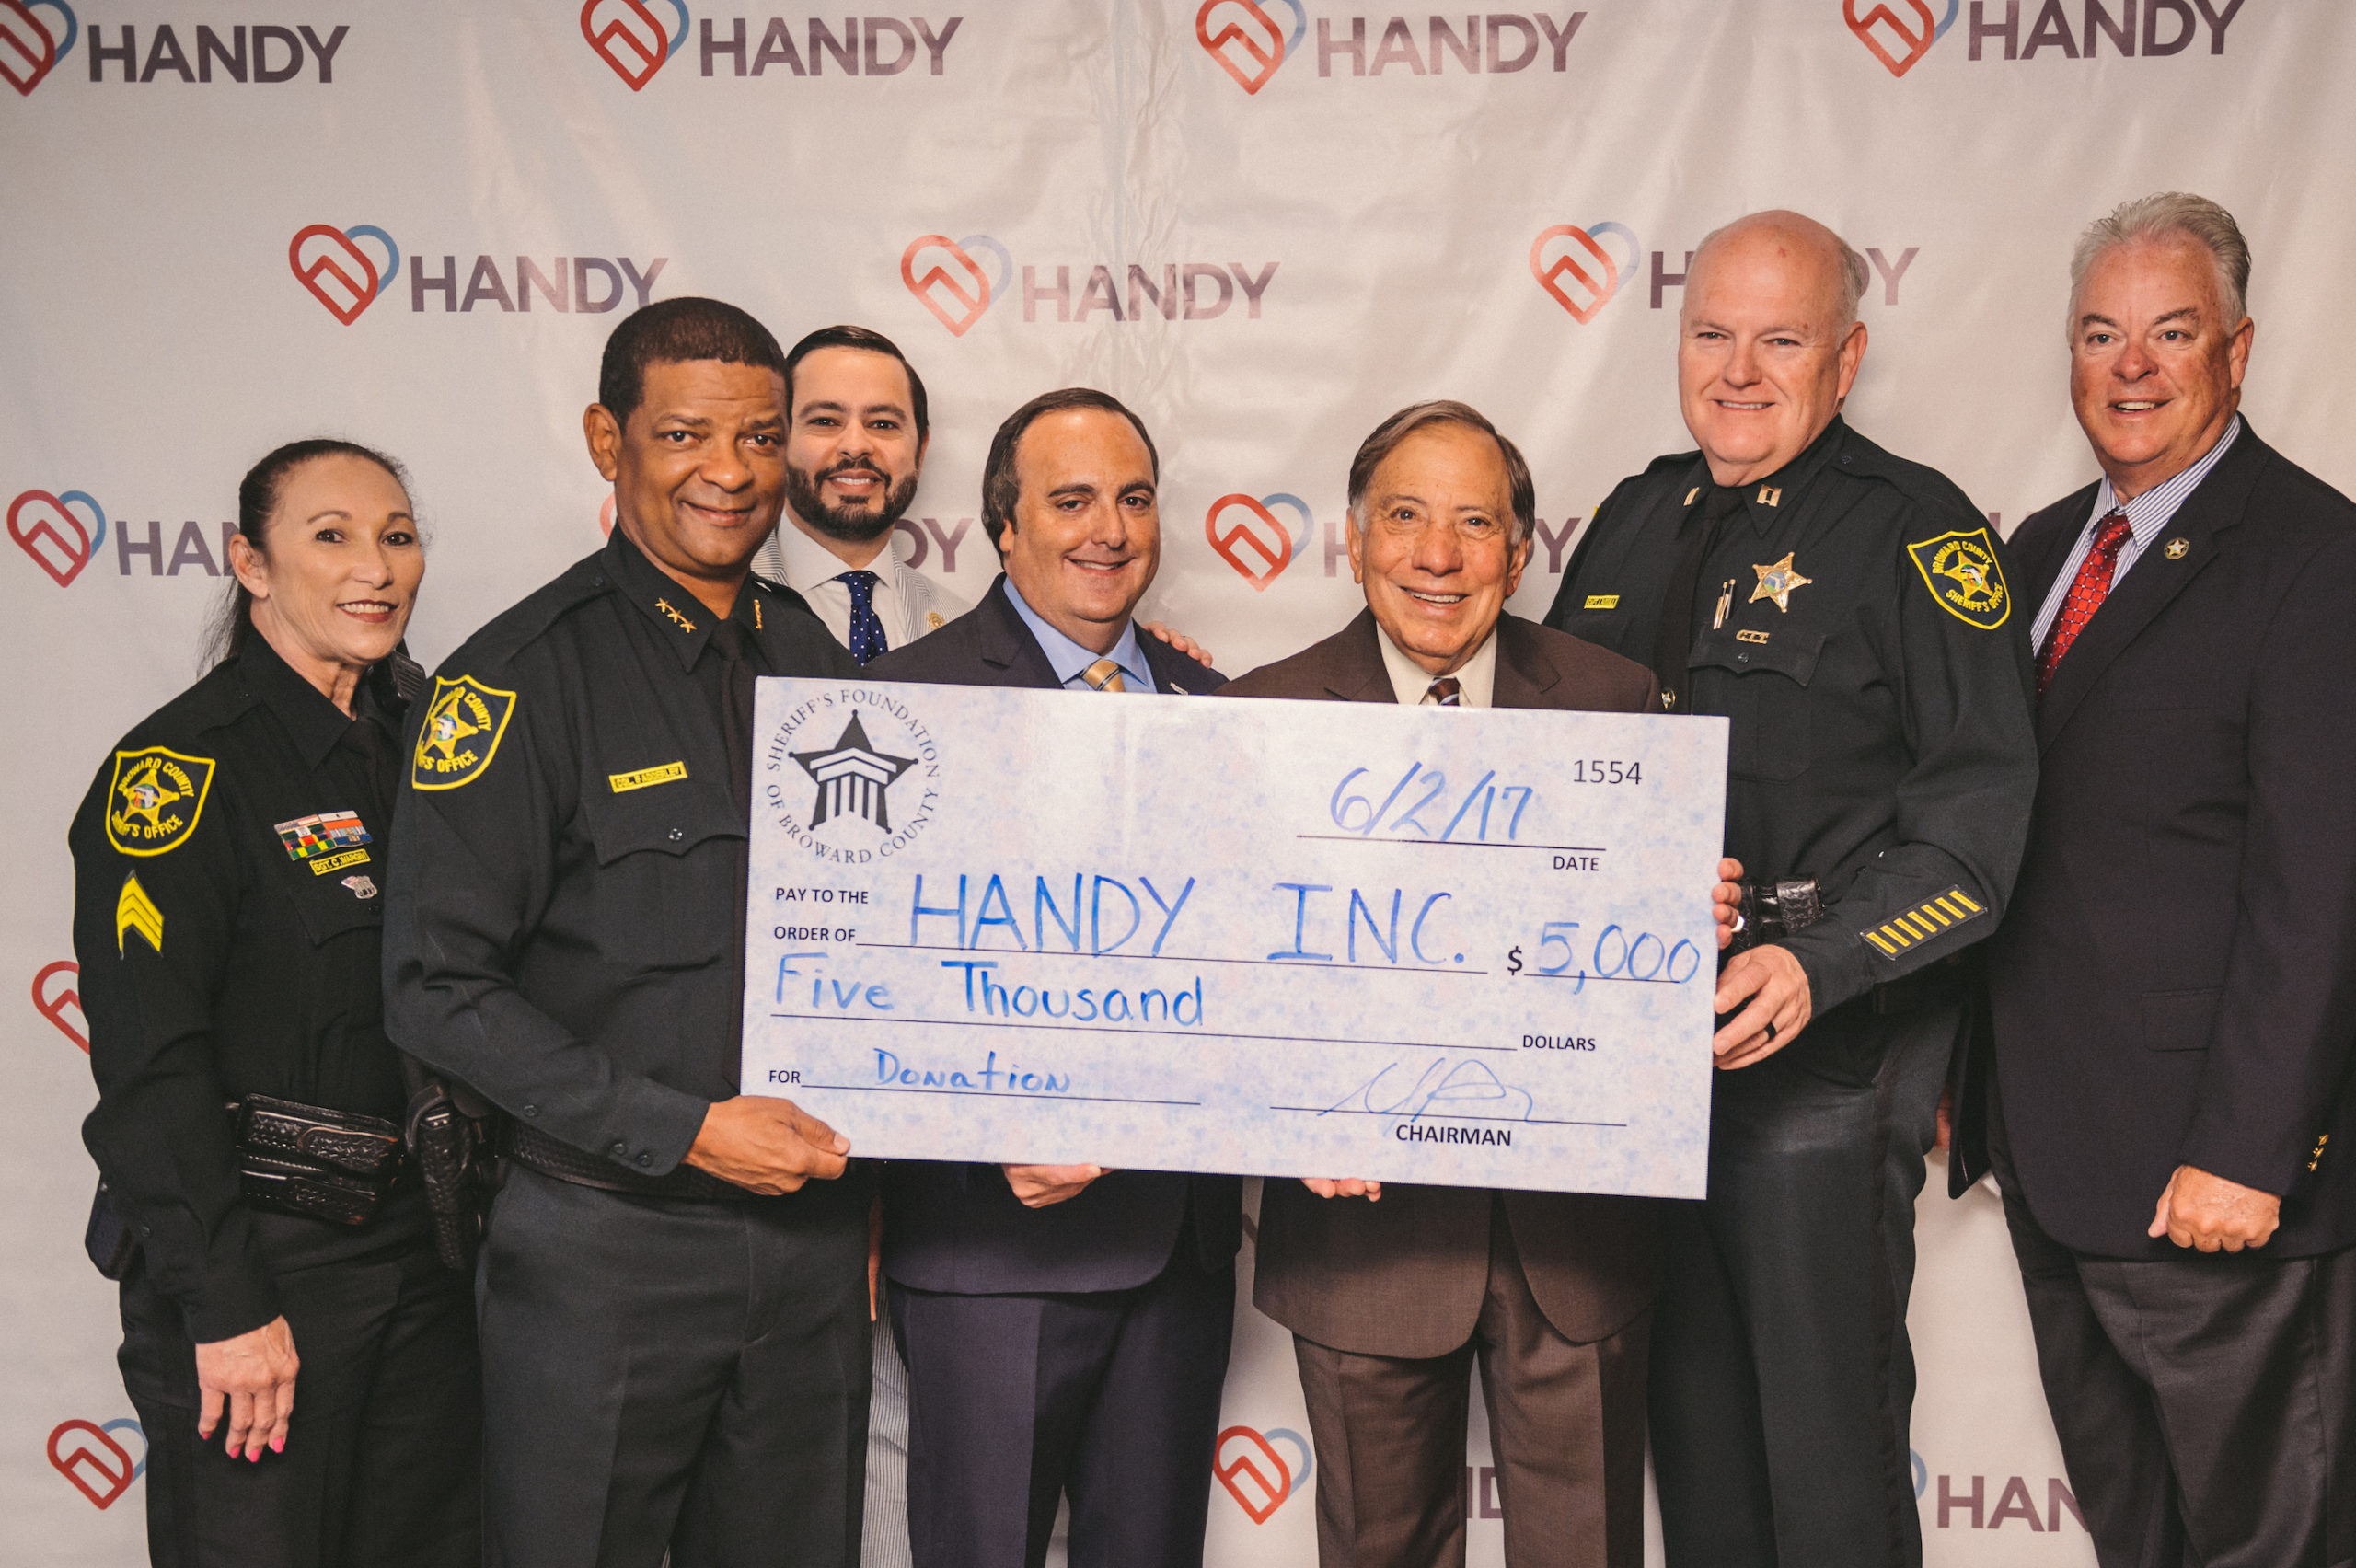 Handy Inc Donation check being held by two people surrounded by police officers